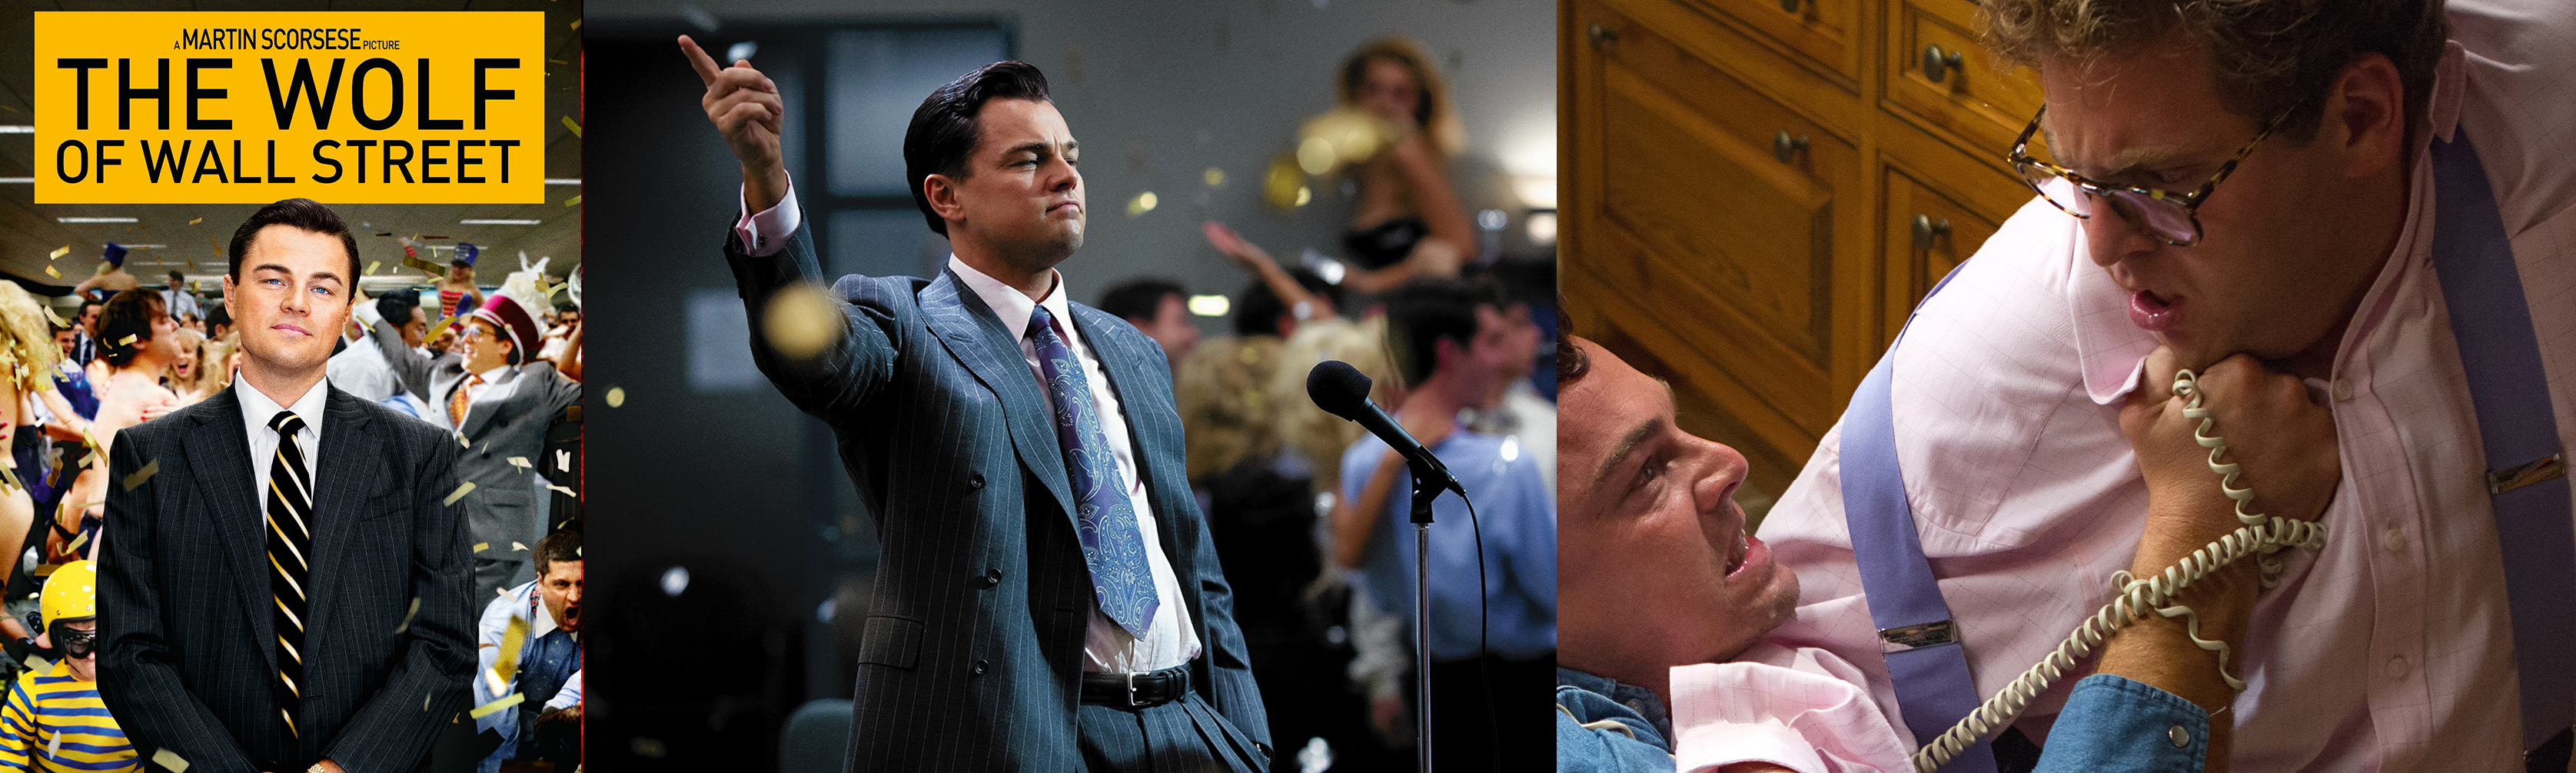 The Wolf of Wall Street (2014) – Movie Review | absolutebadasses